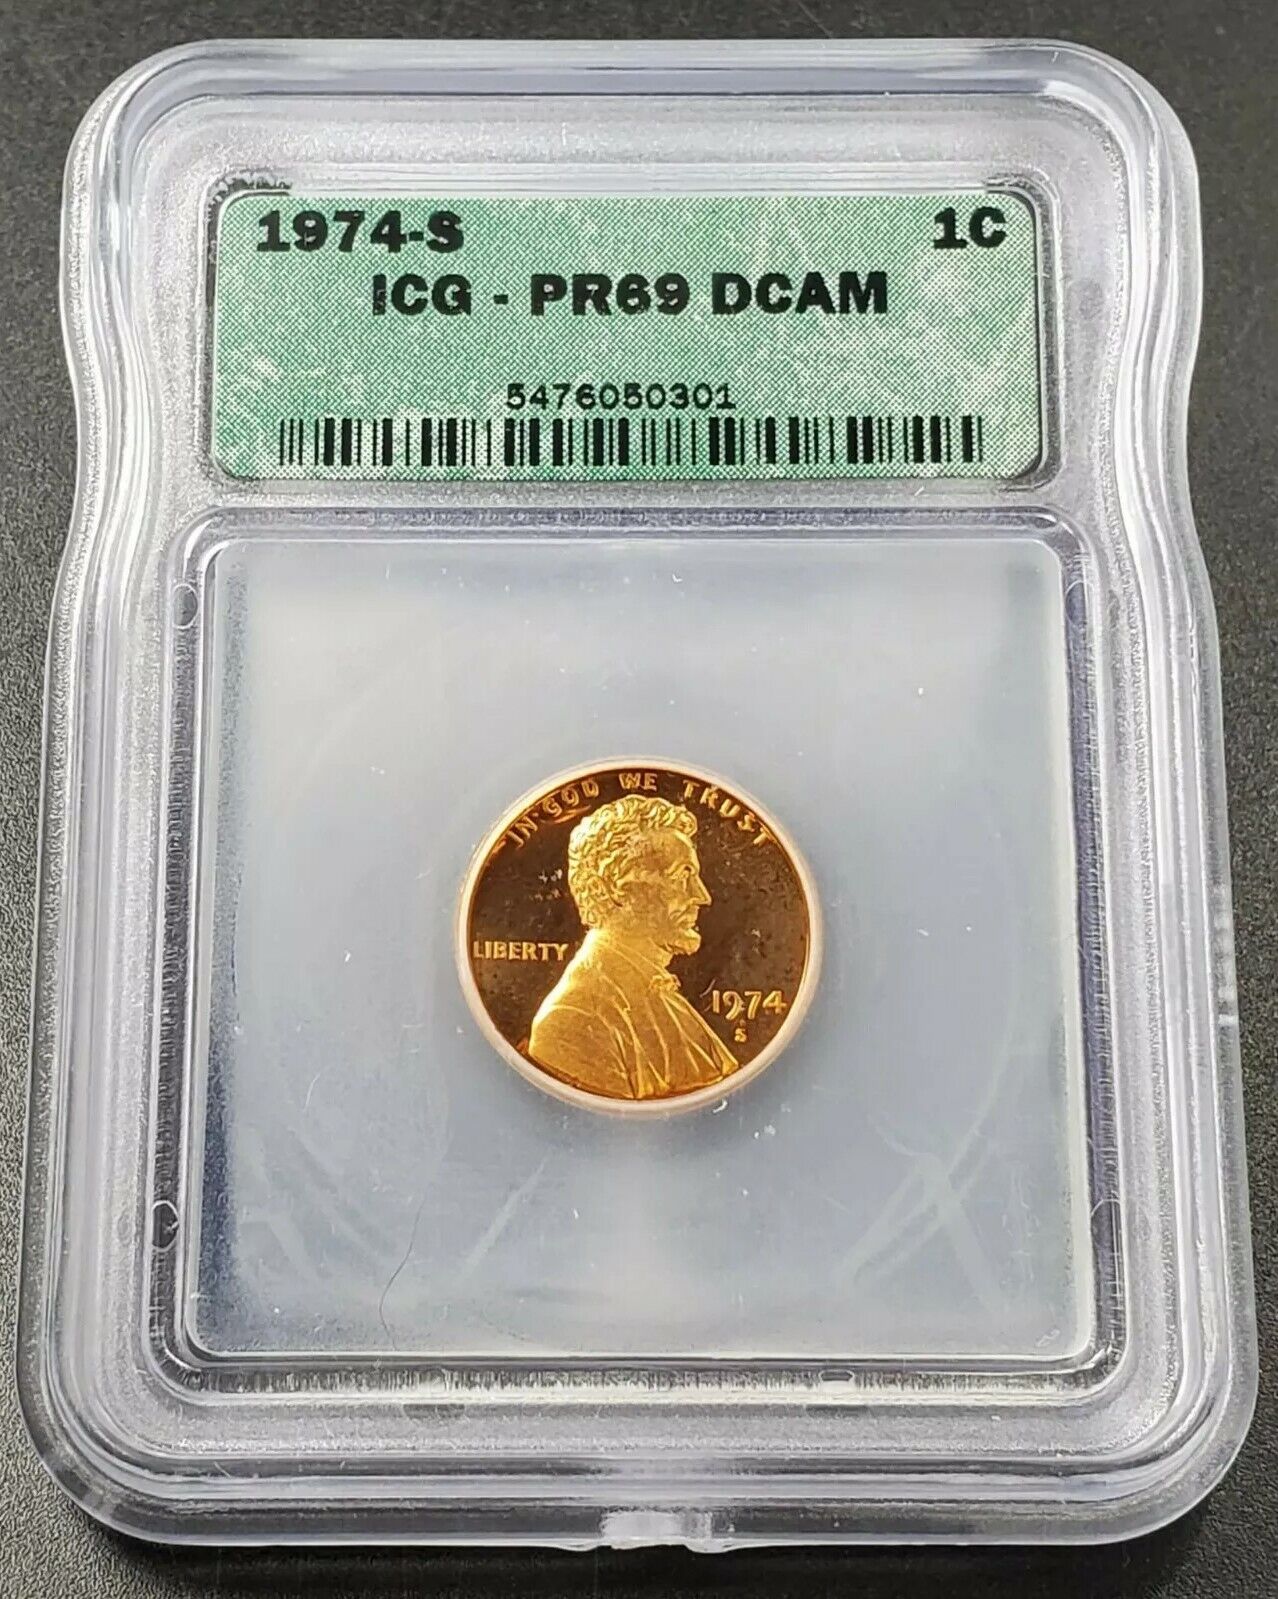 1974 S Lincoln Memorial Cent Penny Coin Vintage ICG PR69 Gem Proof #3